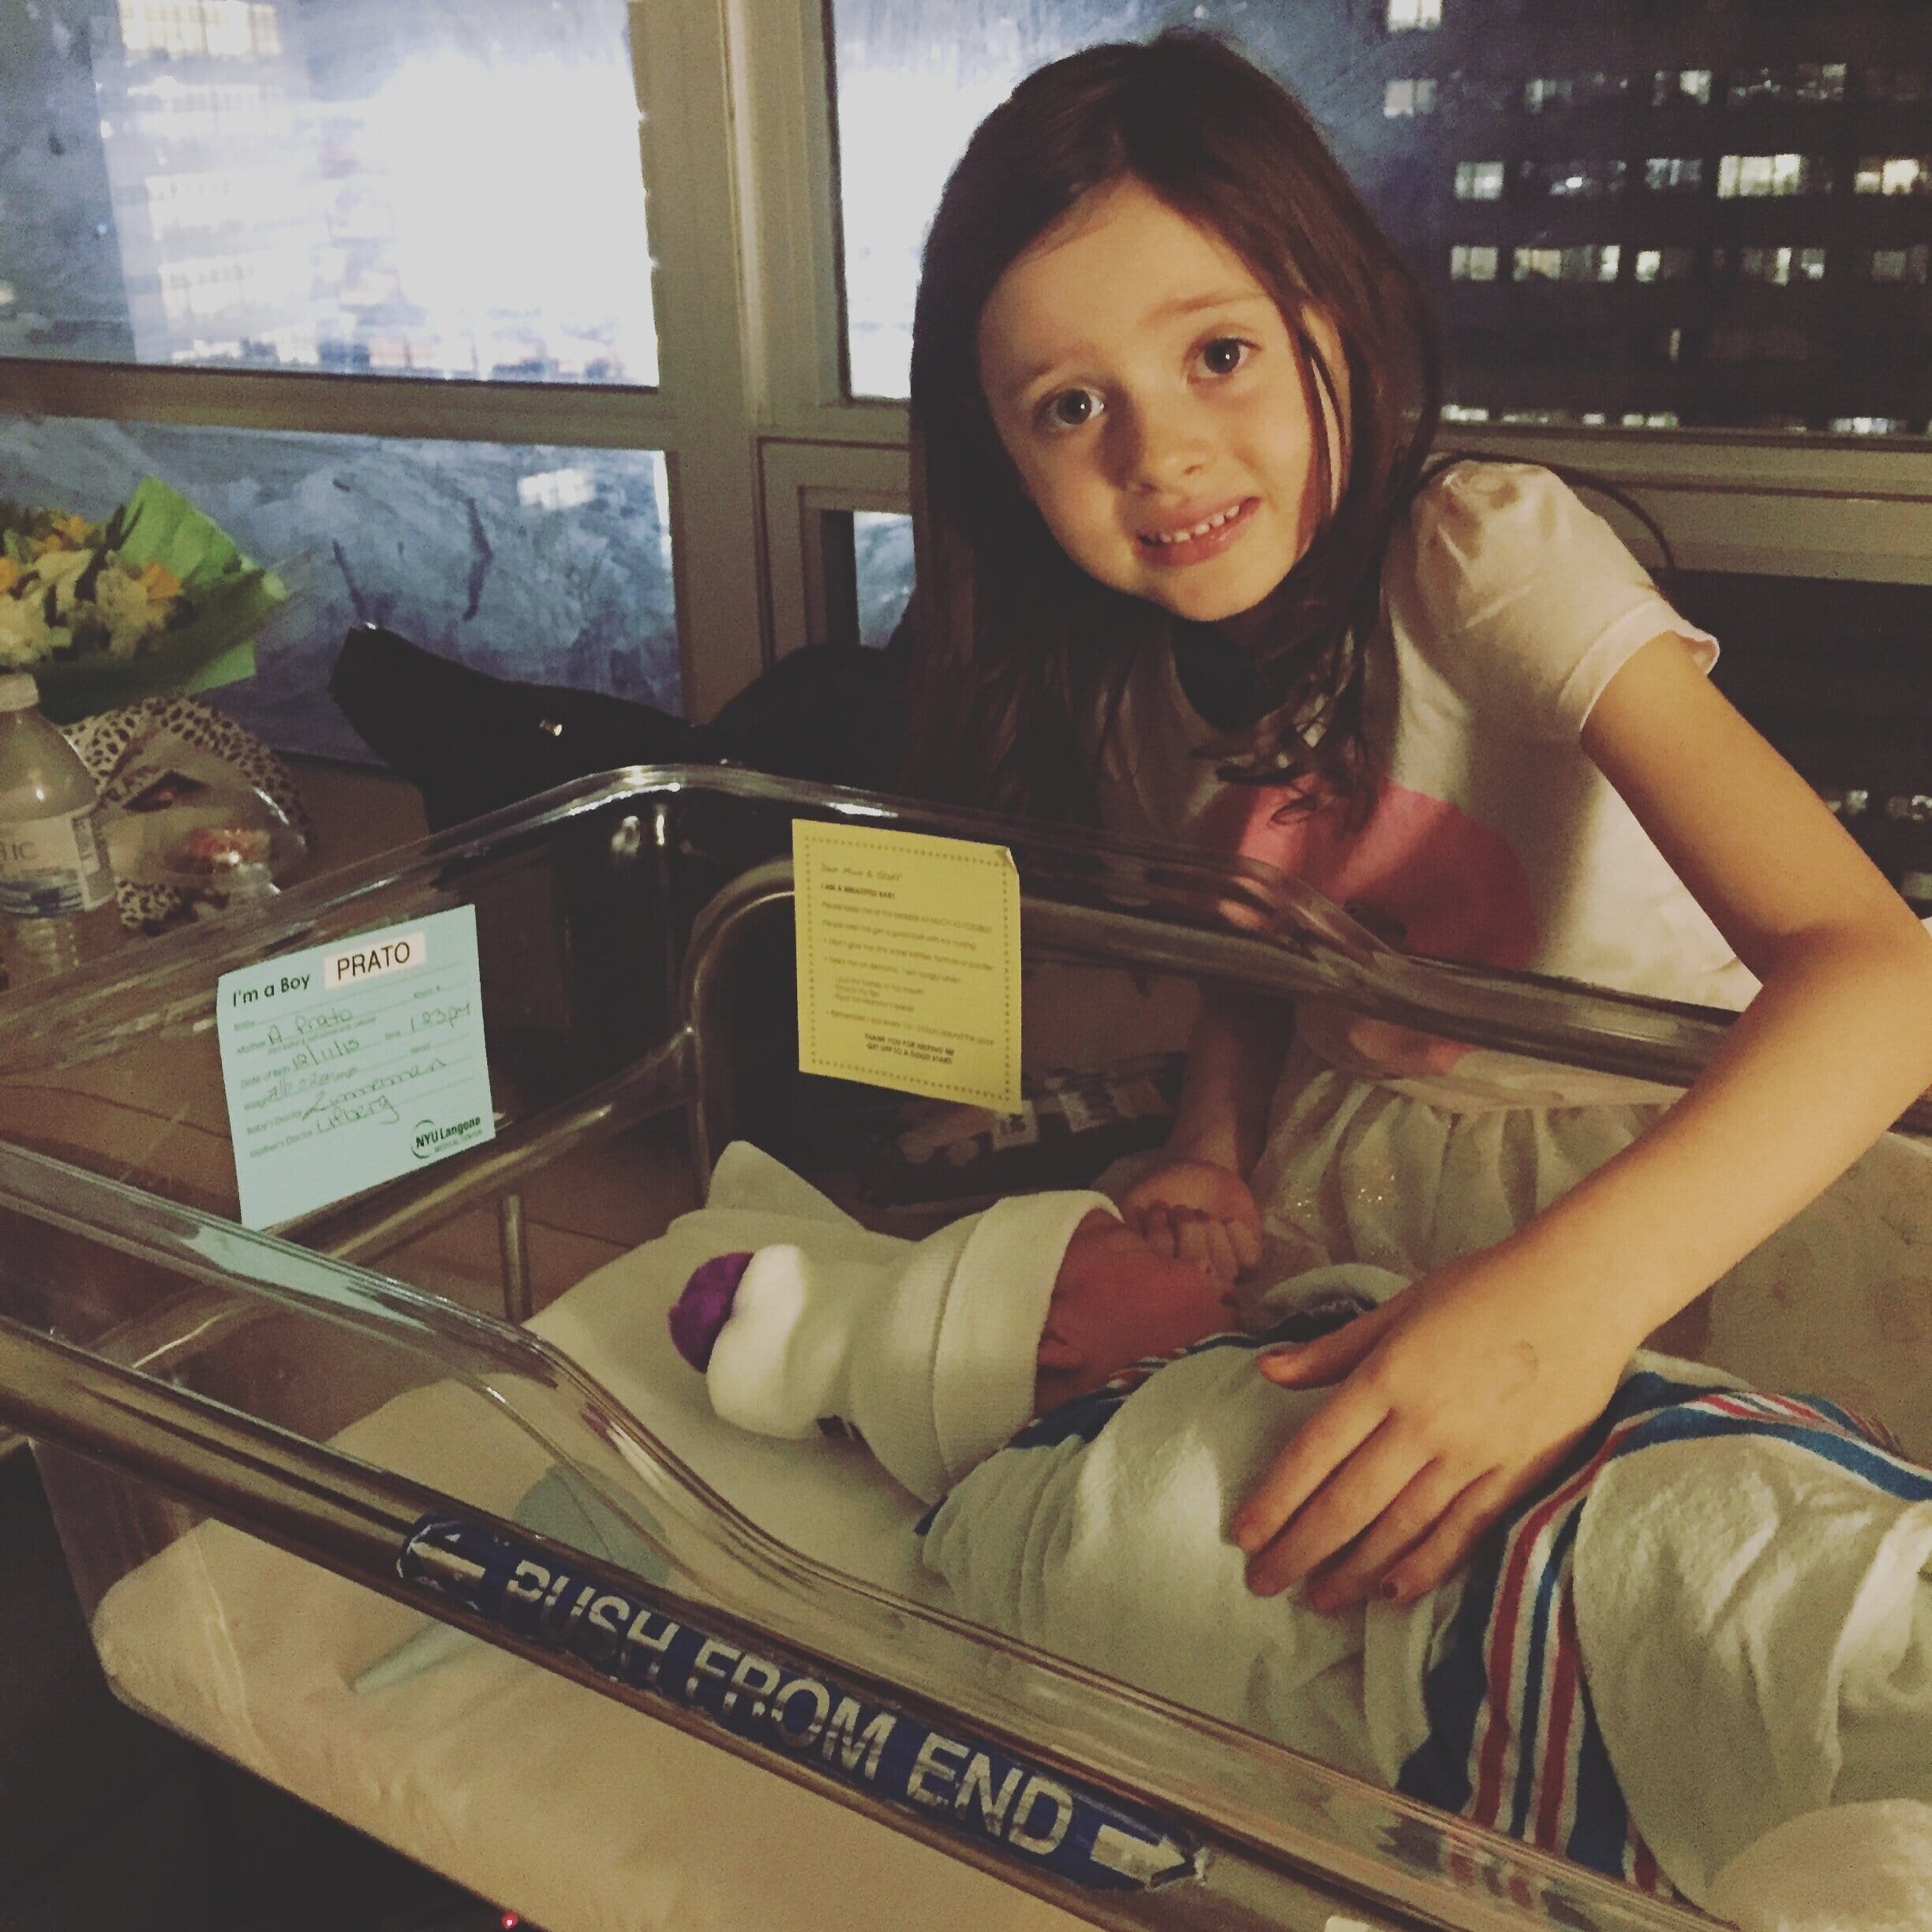 alison prato's daughter and newborn baby at the hospital